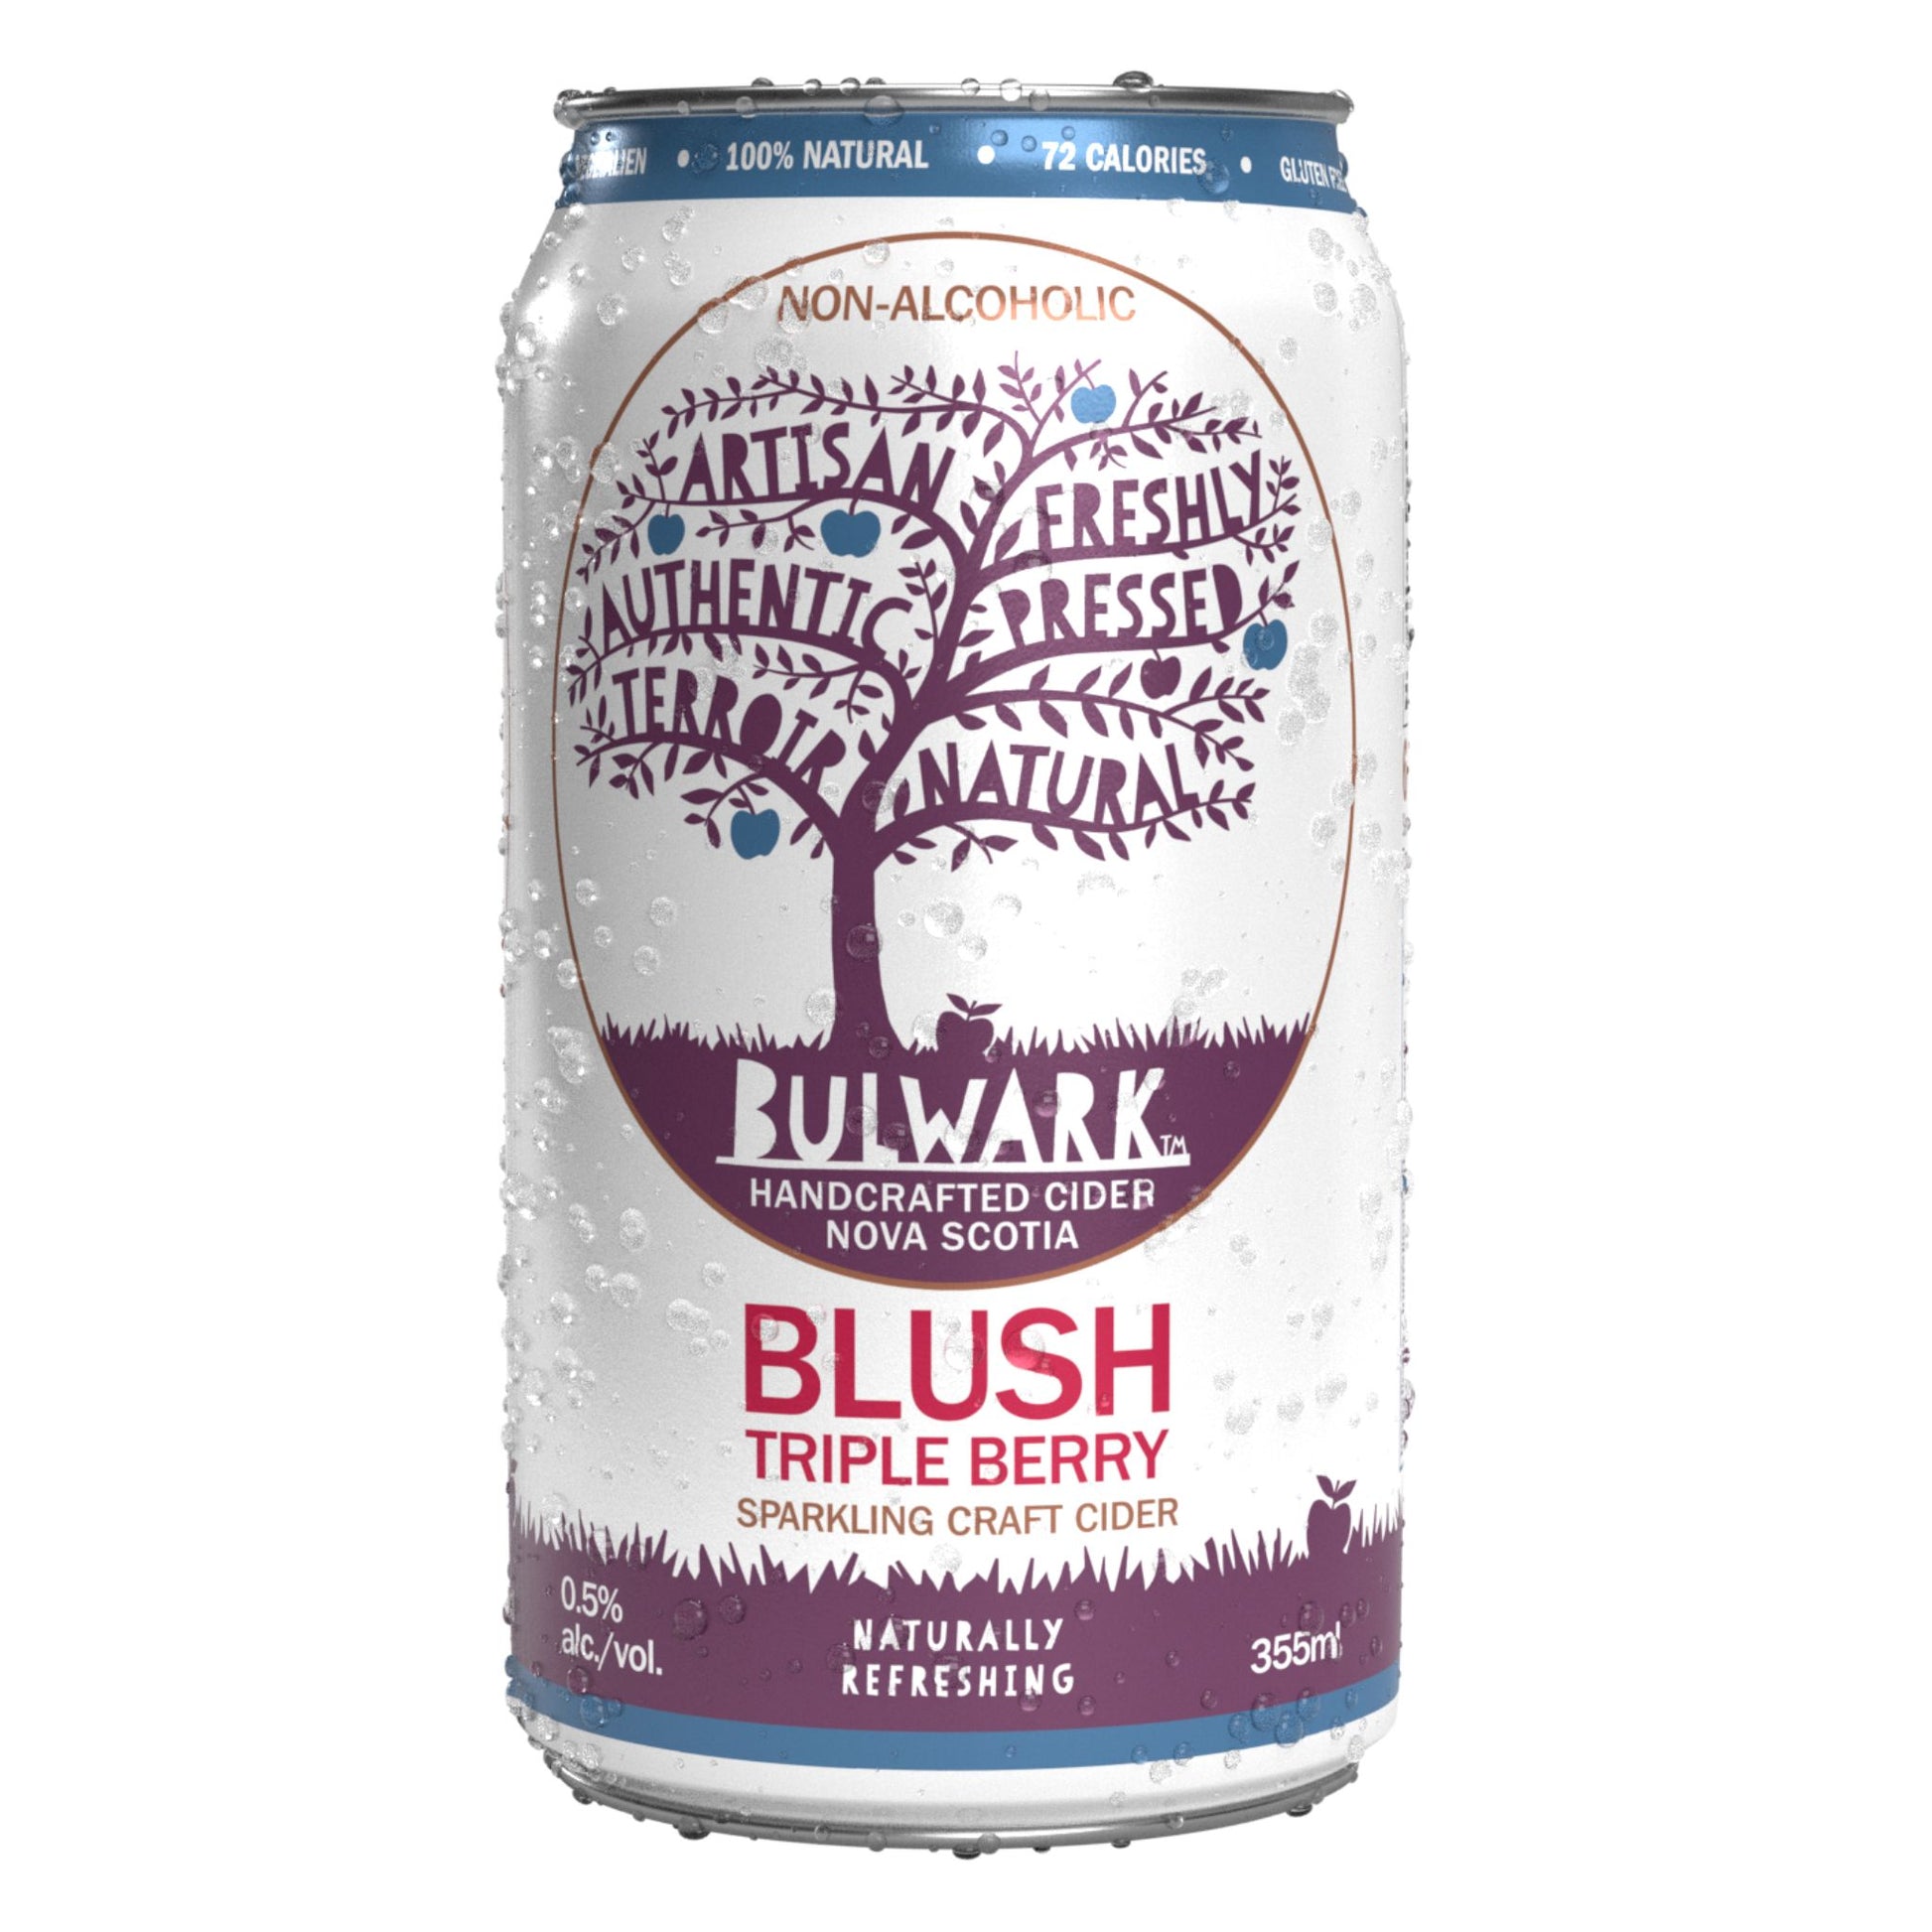 Bulwark Blush Triple Berry Non-Alcoholic Sparkling Craft Cider is available for sale at Knyota Non-Alcoholic Drinks in Ottawa.